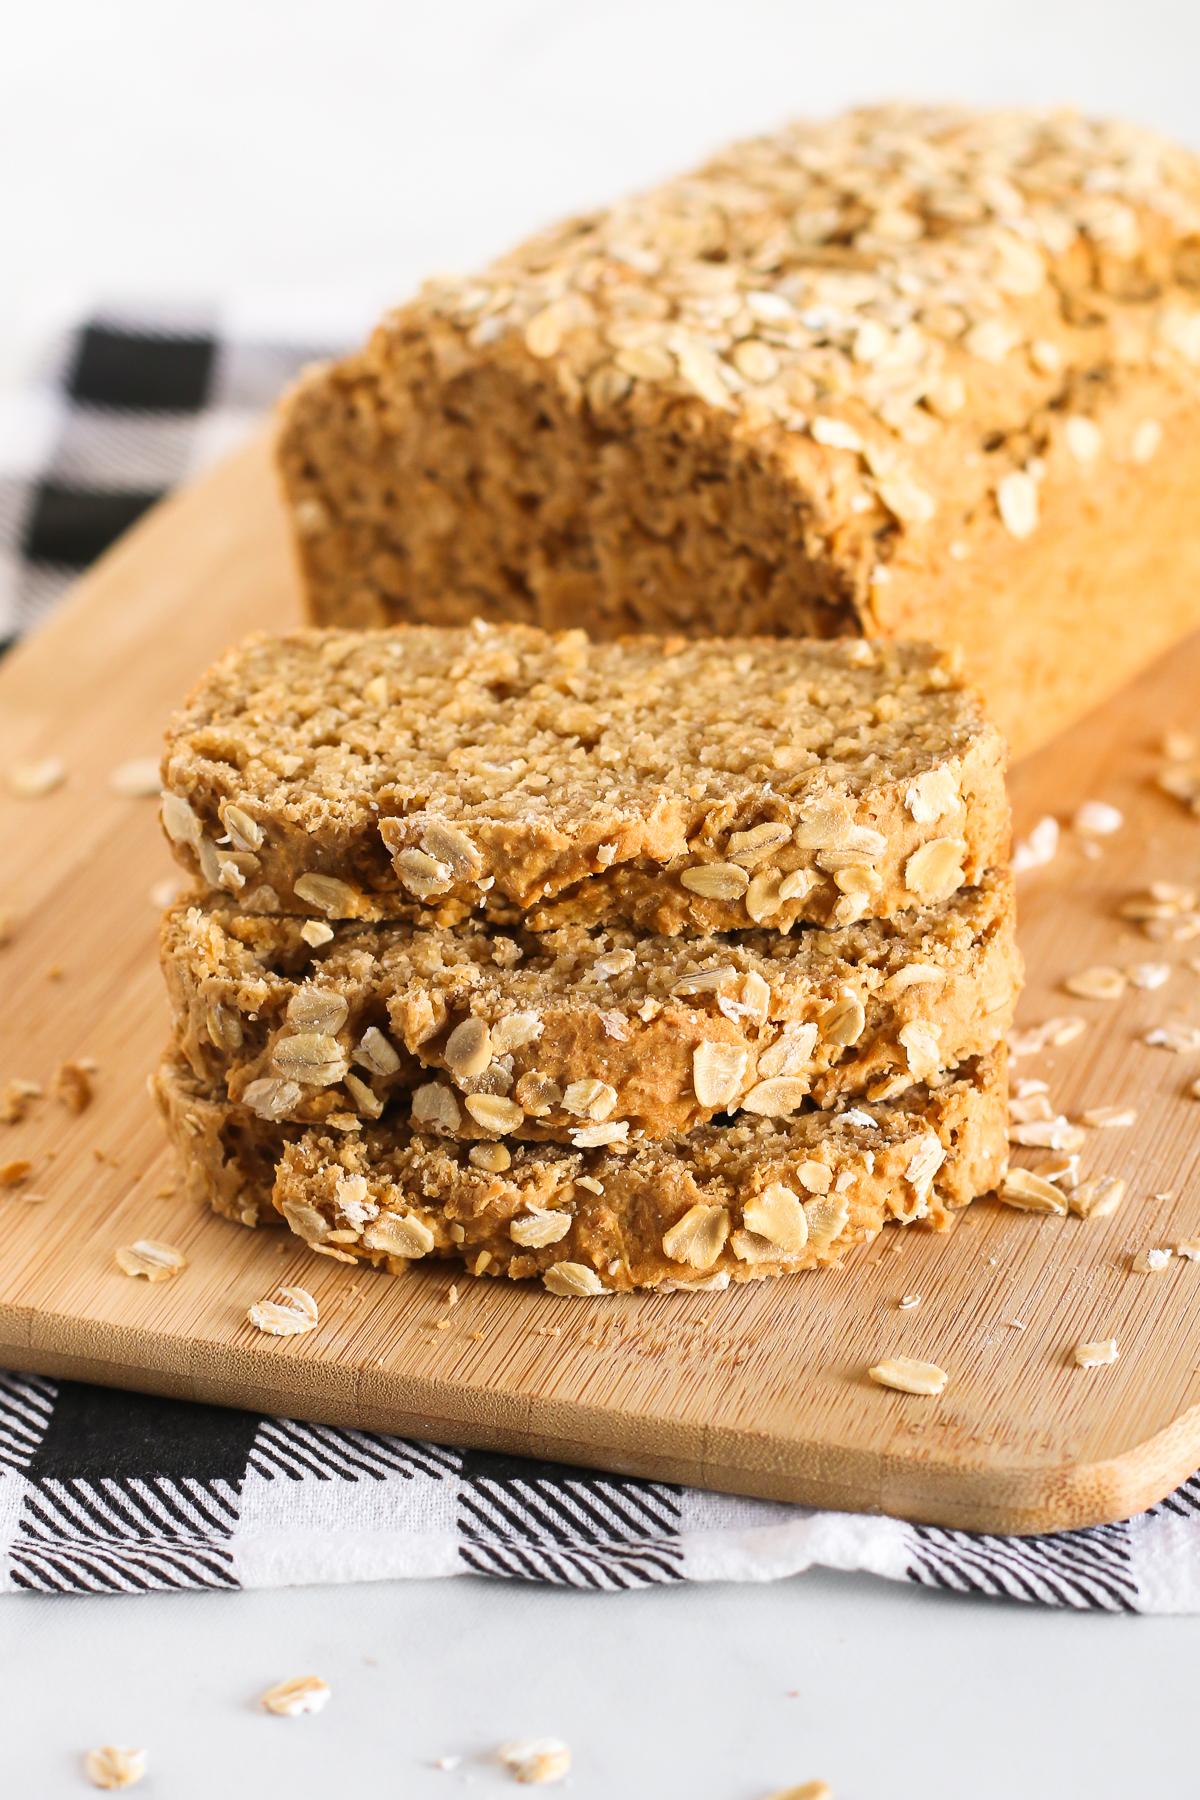 Gluten Free Vegan Bread Brands Try Our Delicious New Vegan Breads